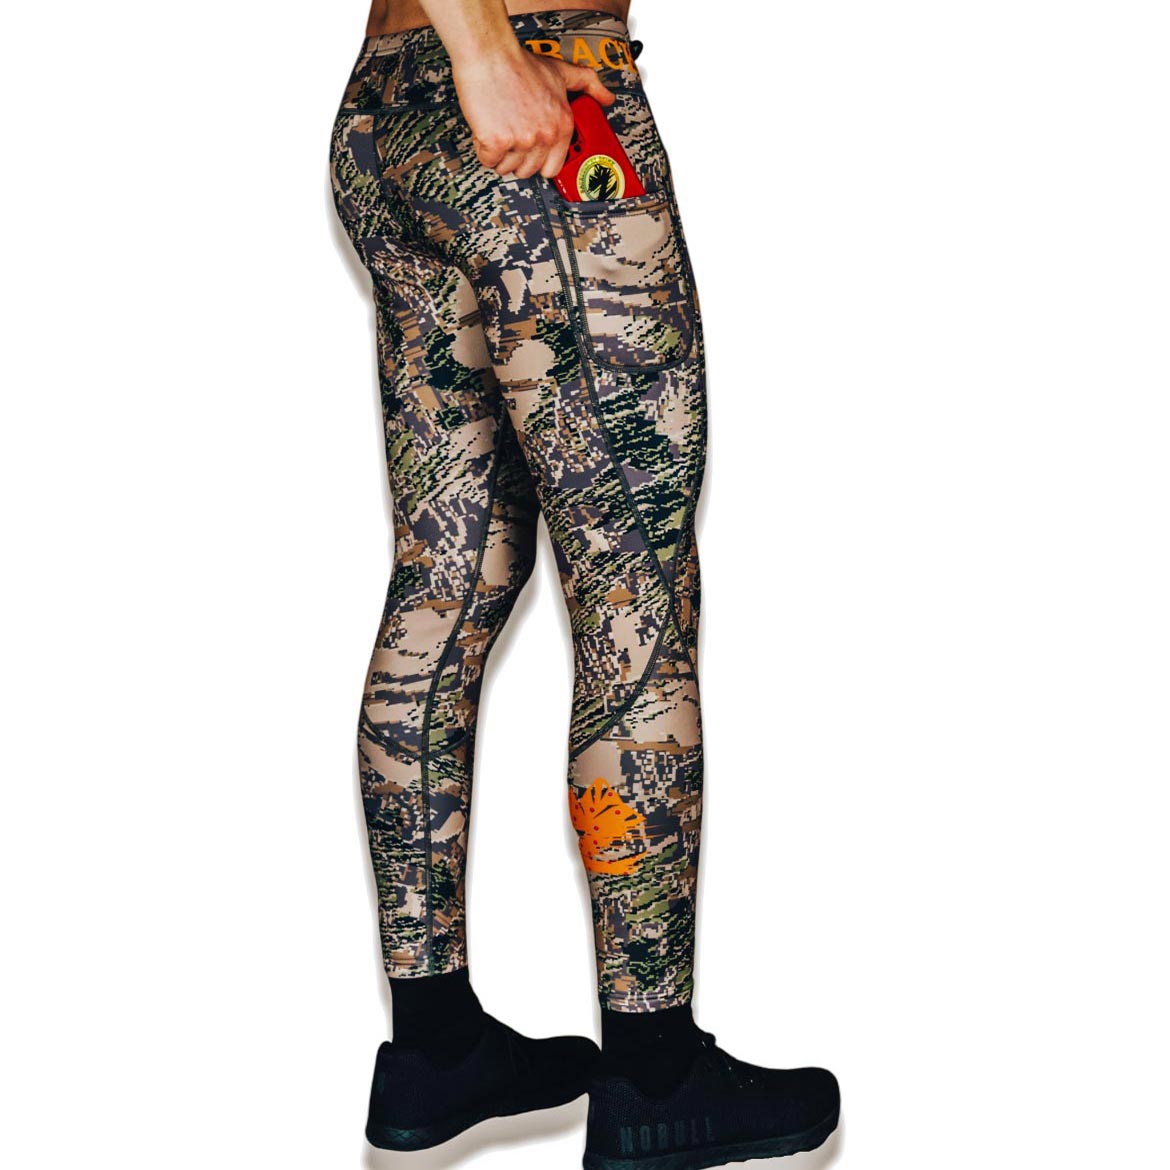 Z Series 1.0 Neoprene Compression Camo Pant - Unisex - Southern Latitude  Guides